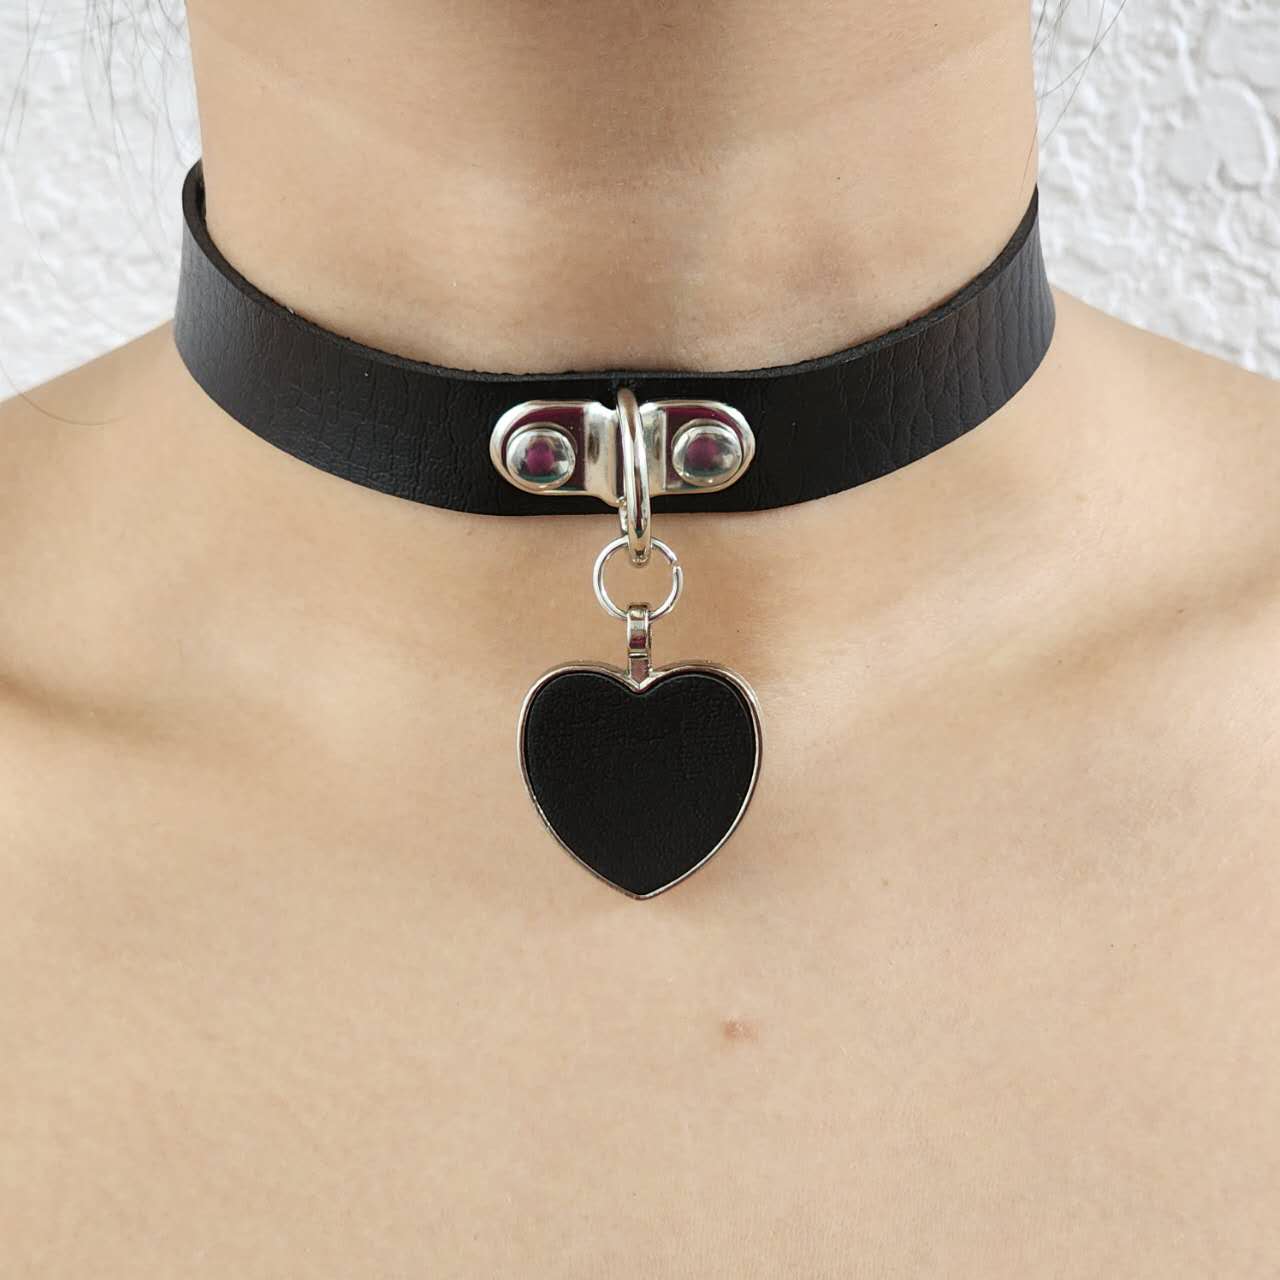 Buy Punk Leather Choker Necklace Gothic Choker for Women Halloween Costume  Accessory Adjustable Collar Choker Cosplayer Online in India - Etsy